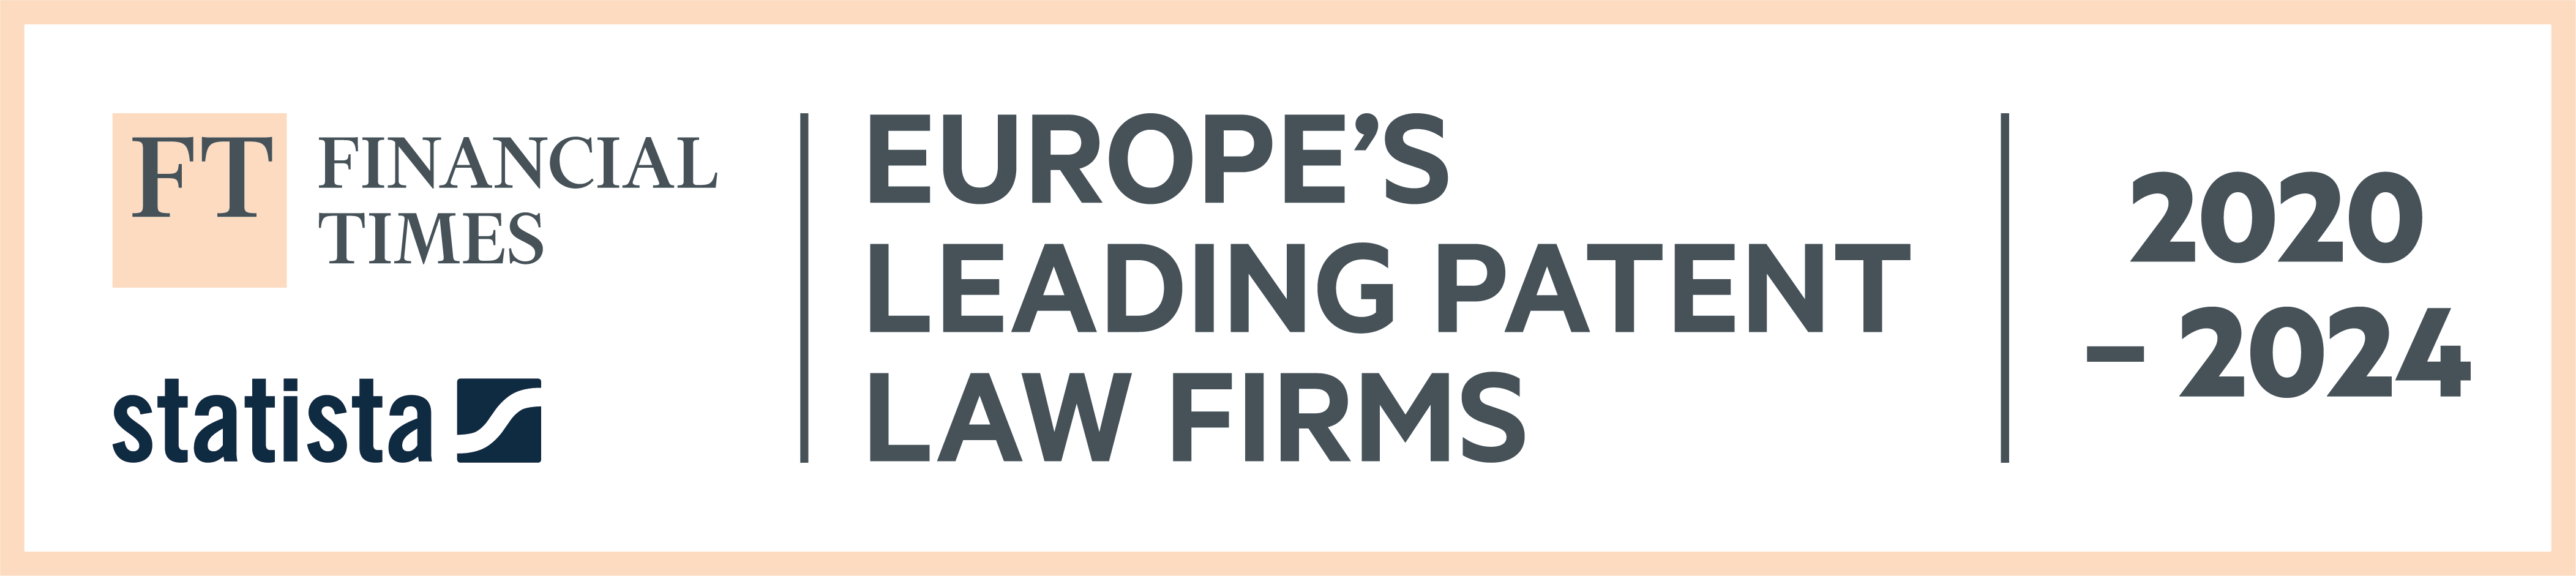 Financial Times - Europe’s leading patent law firm